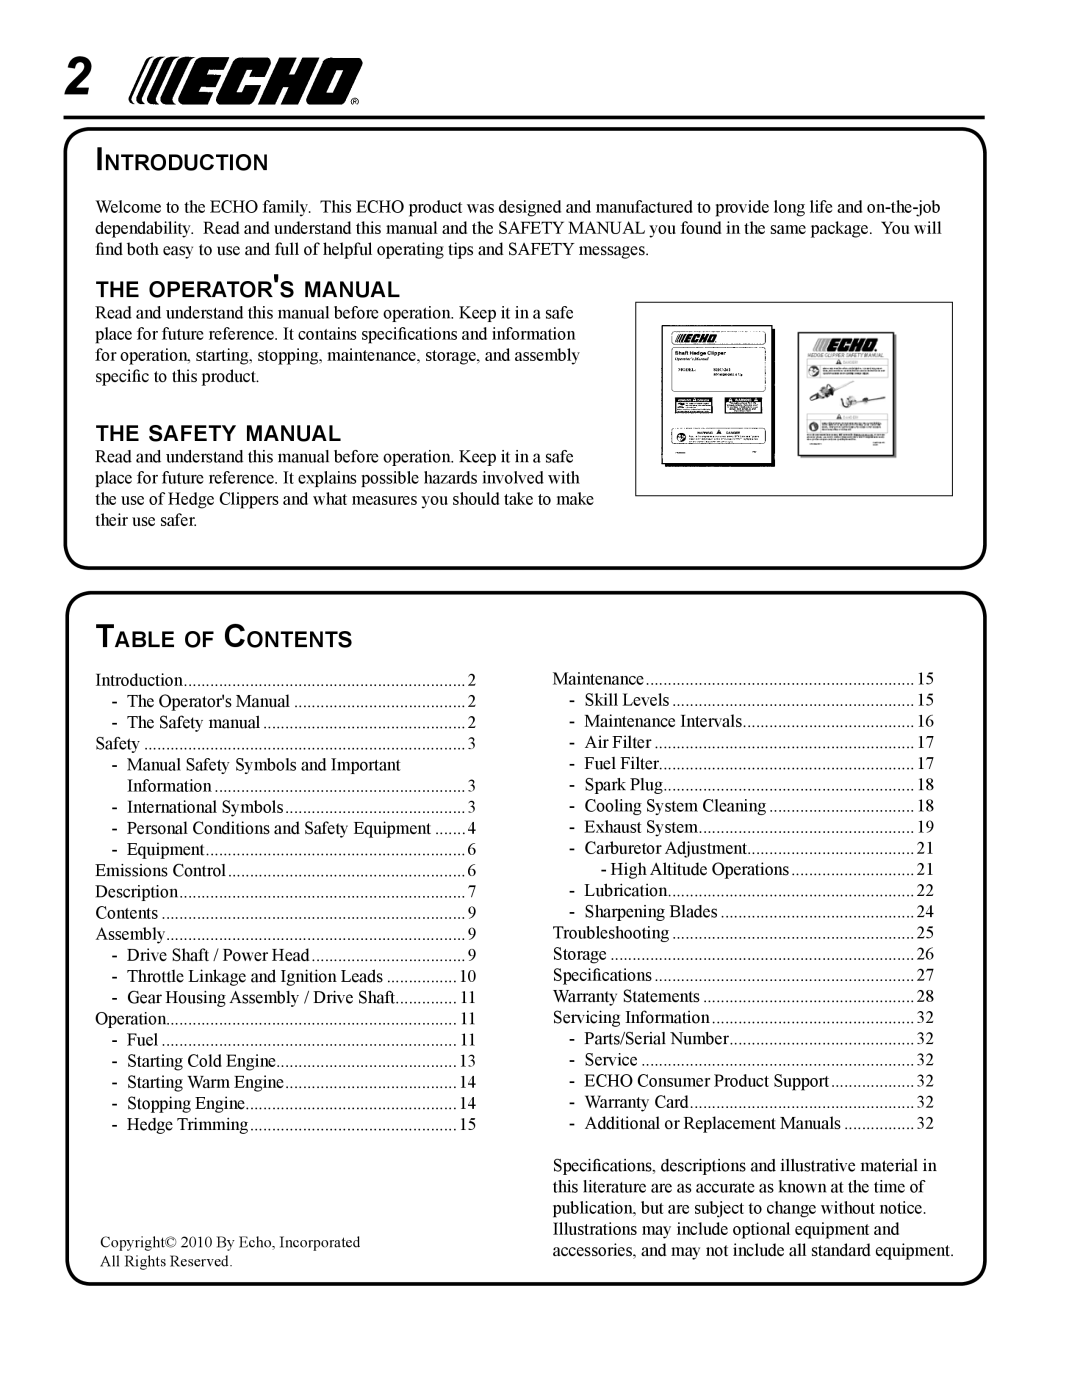 Echo SHC-265 Introduction, Operators manual, Safety manual, Table of Contents 